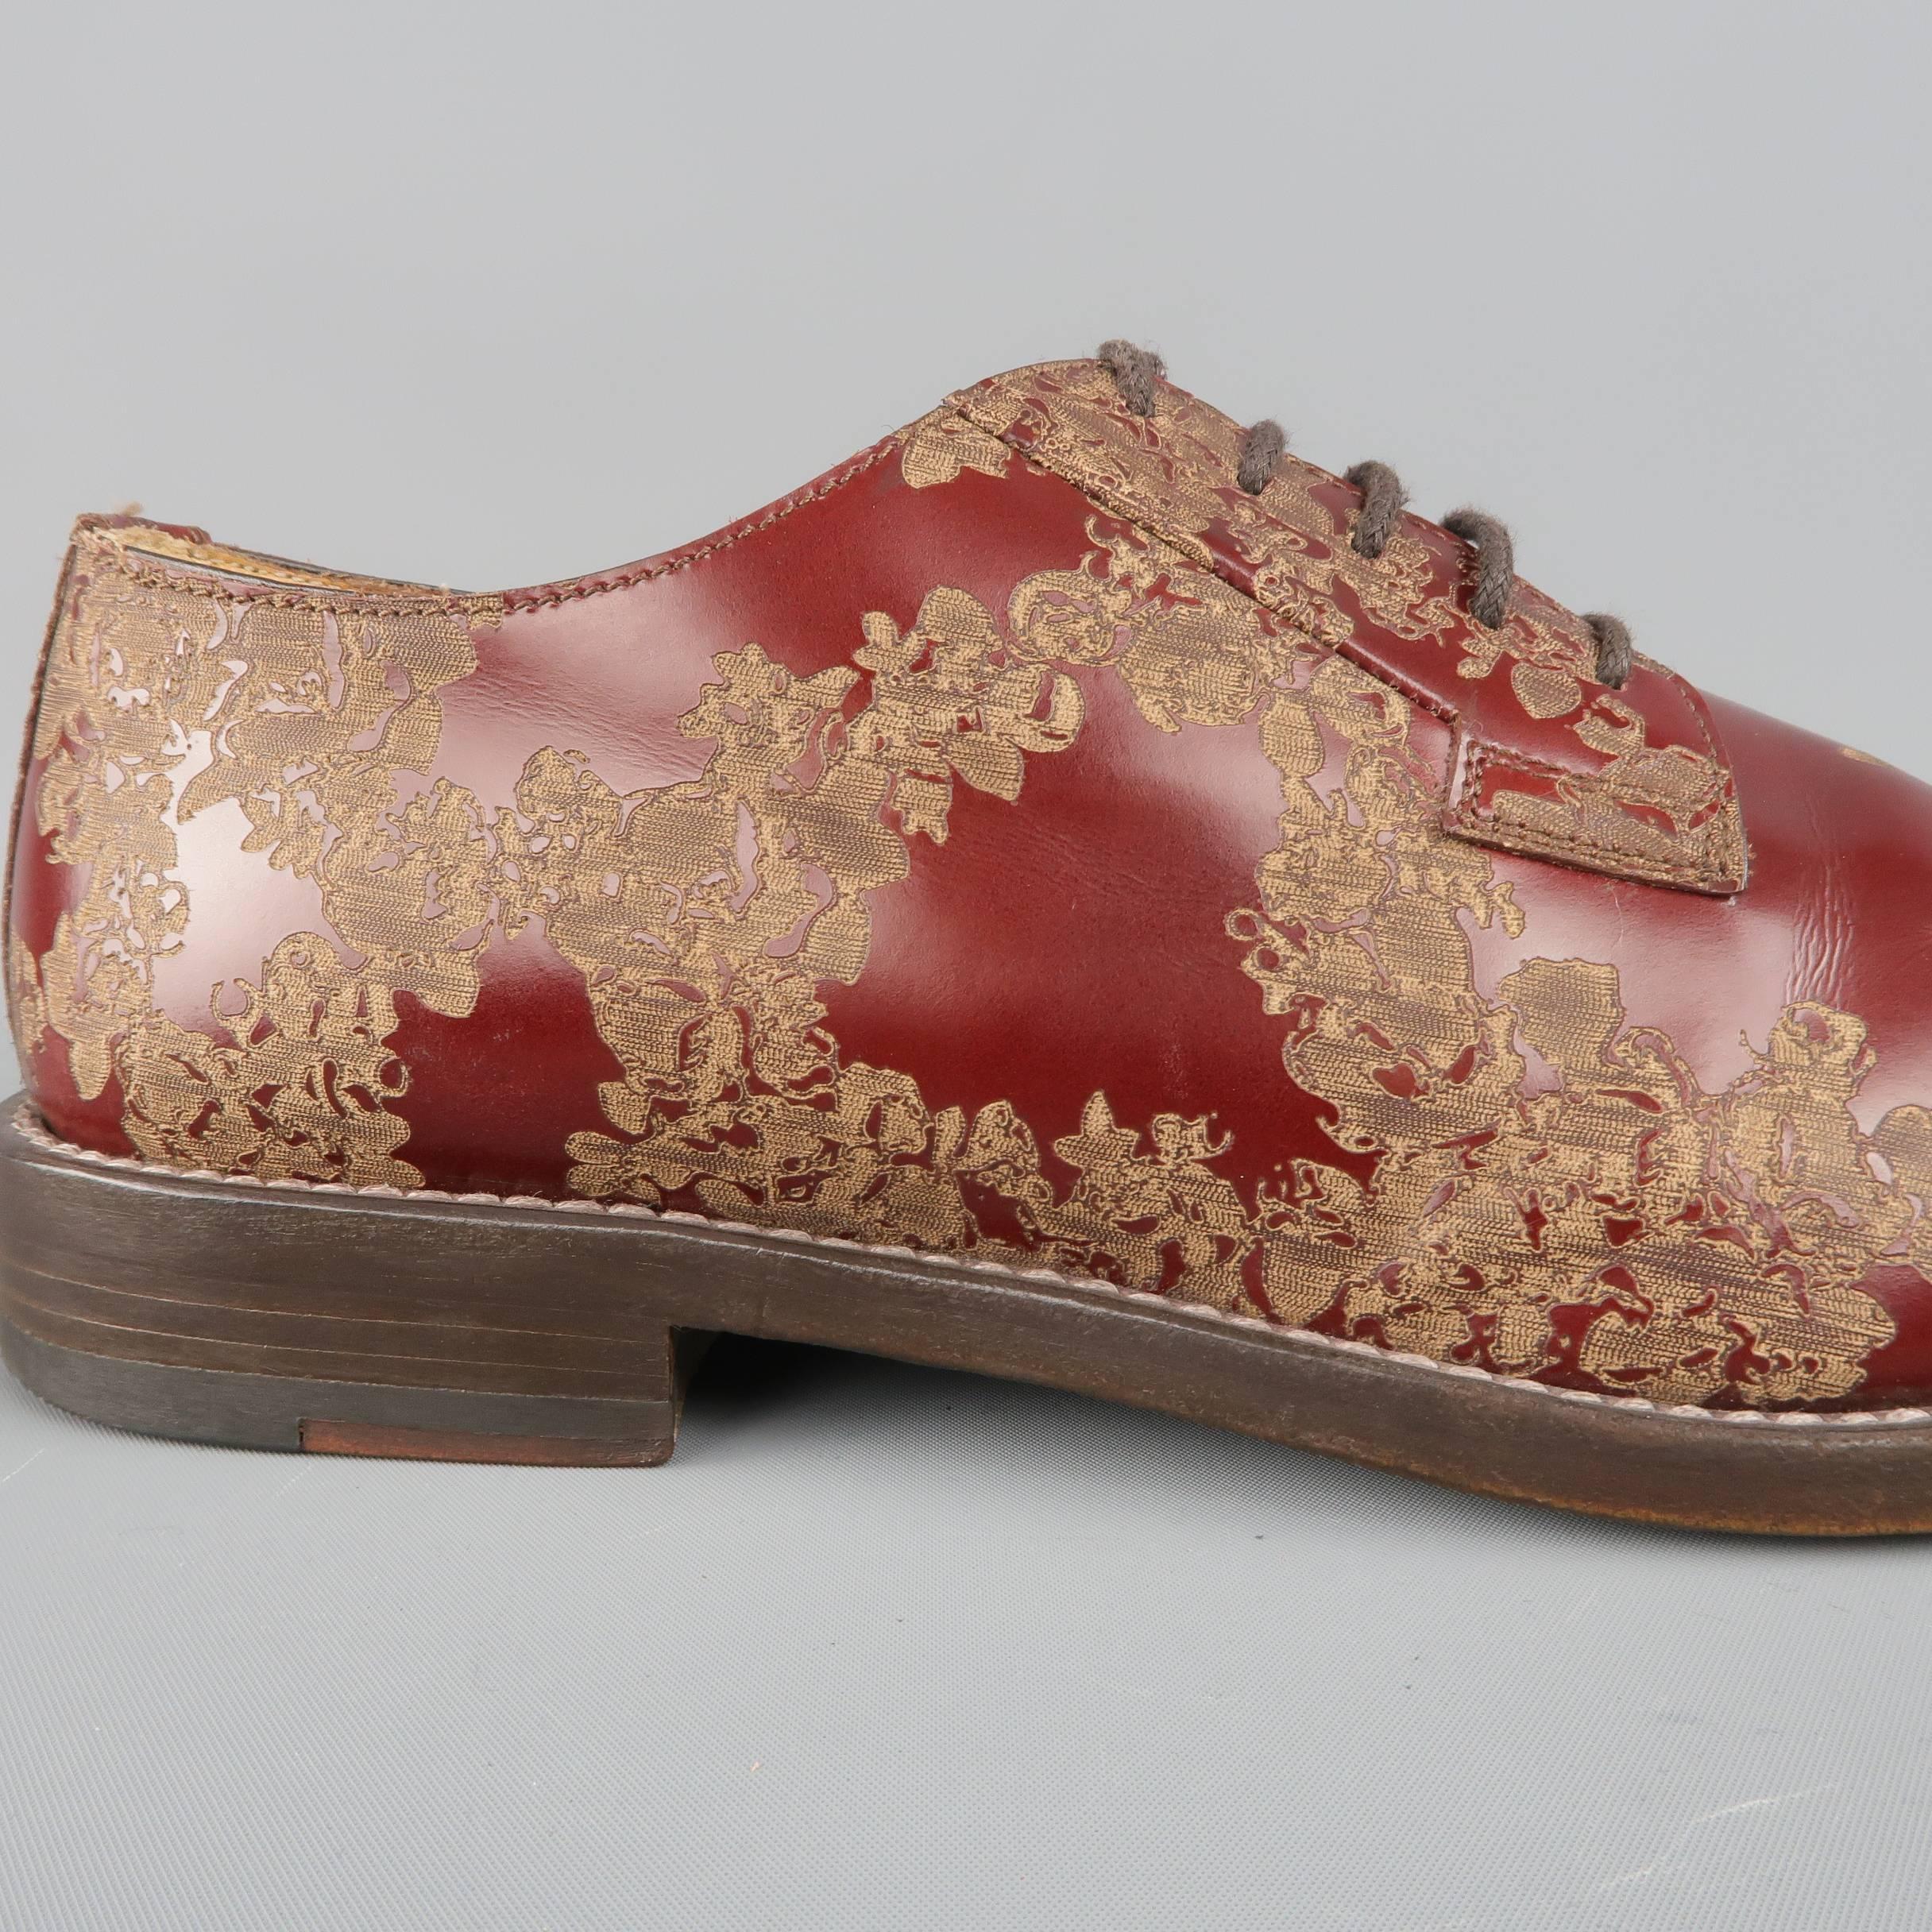 MARC JACOBS lace up derbys come in a semi patent burgundy leather with all over beige floral print. Made in Italy.
 
Fair Pre-Owned Condition.
Marked: EU 41
 
Outsole: 11.5 x  4.25 in.

SKU: 85357